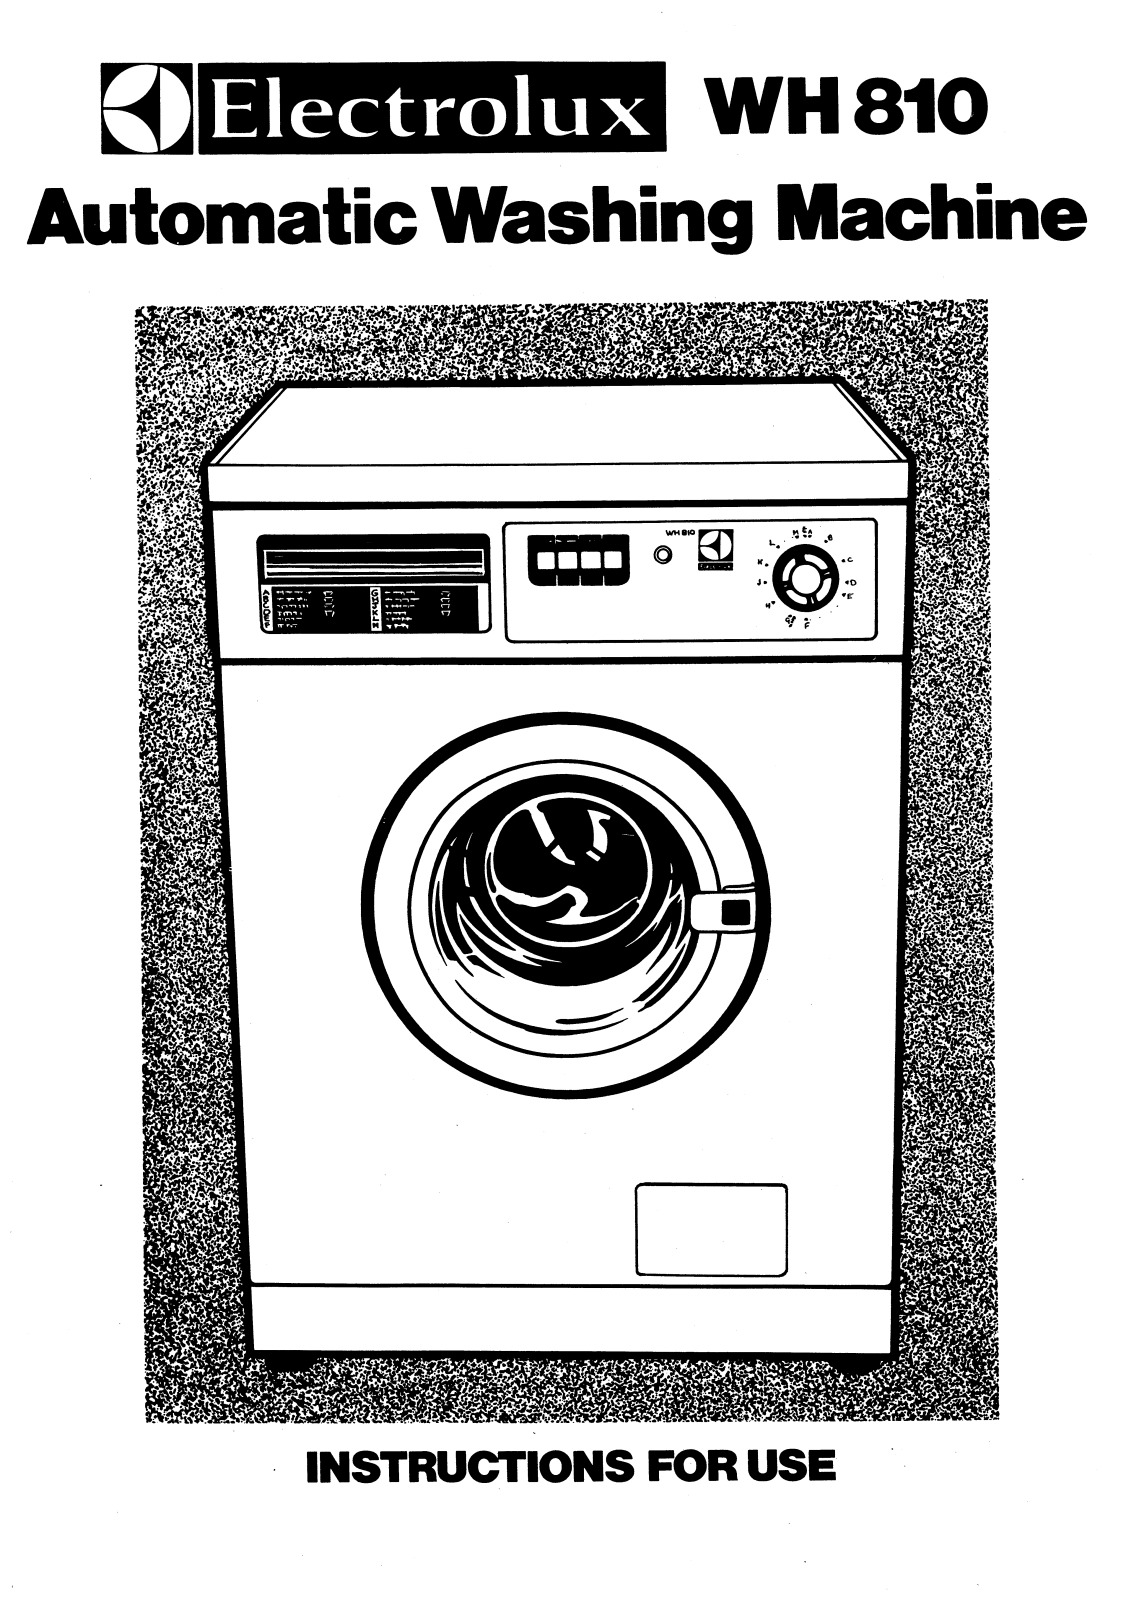 Electrolux WH 810 User Manual